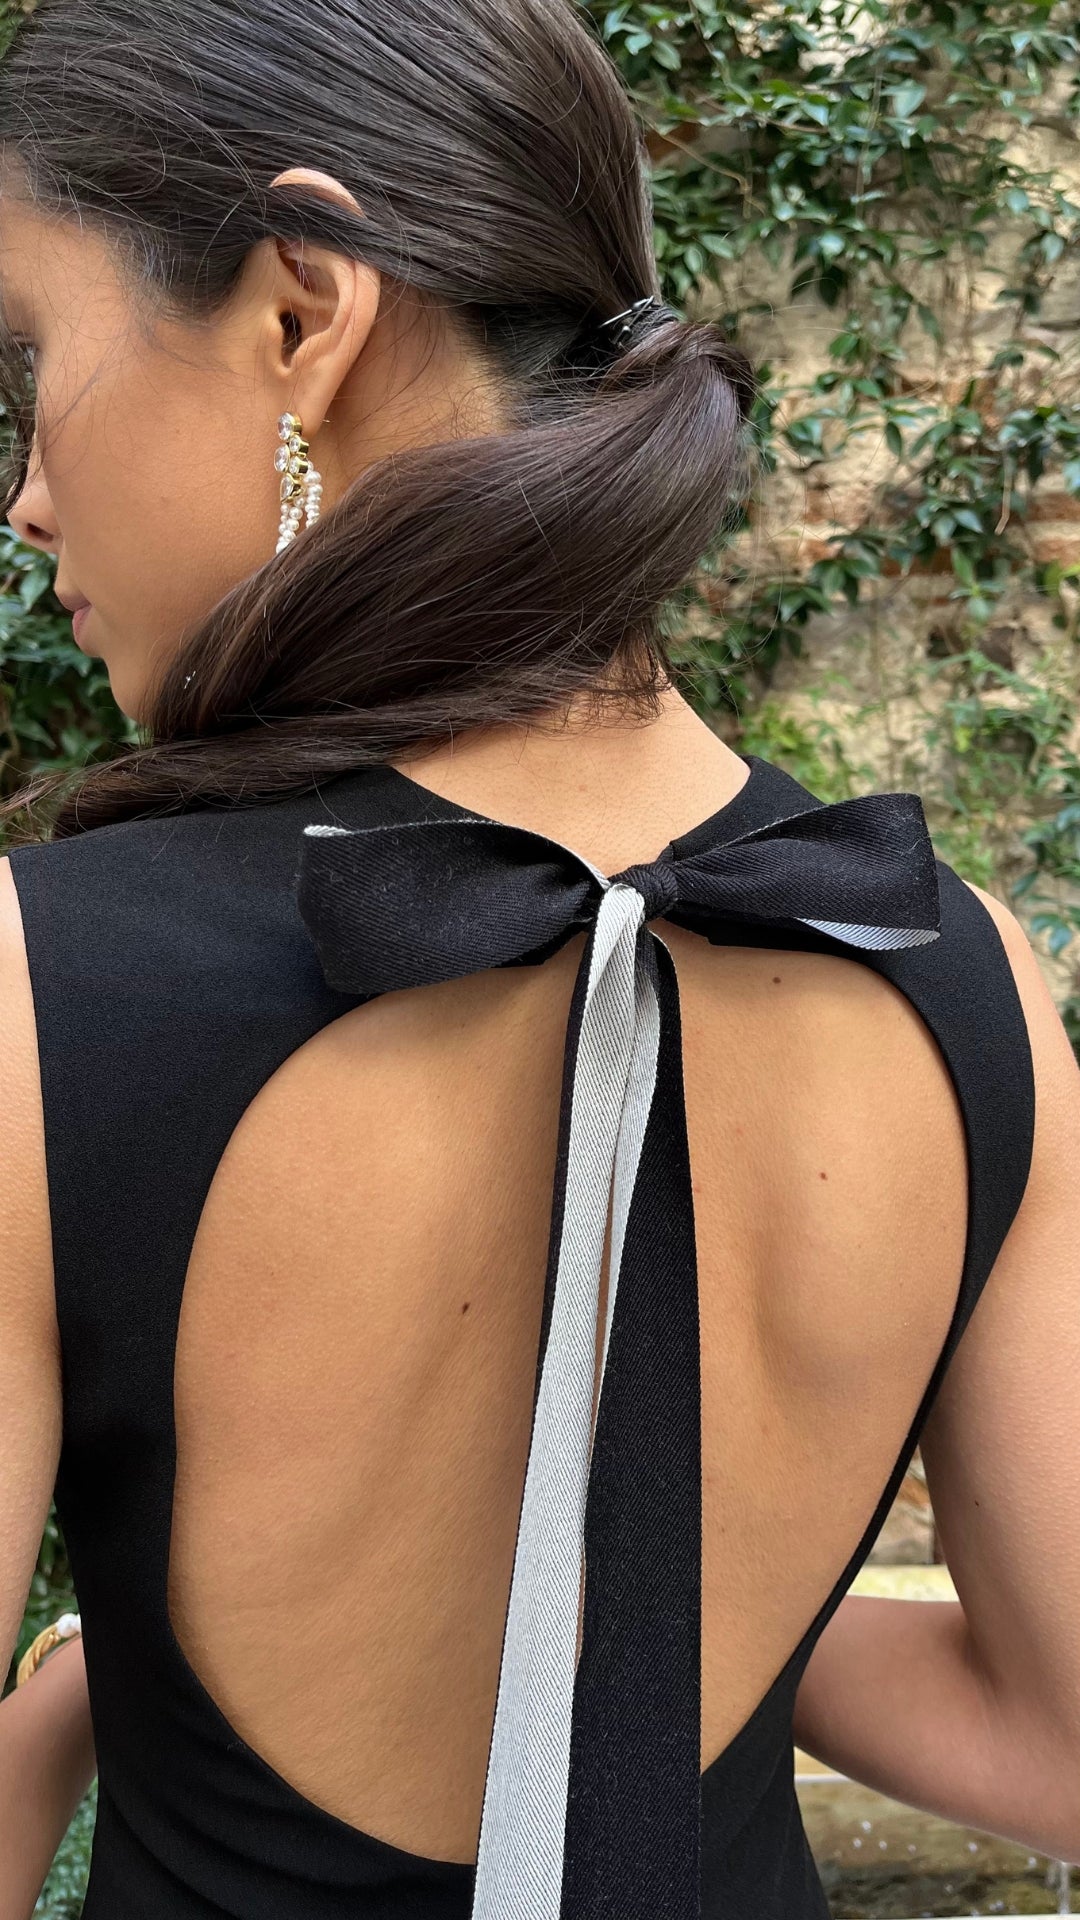 Roksanda Datura Dress. Black midi dress is crepe with front cut our panel and a line draped skirt. Midi length dress. Sleeveless. Open back with elegant tied bow at back nape neck. Shown on model close up of the back detail.